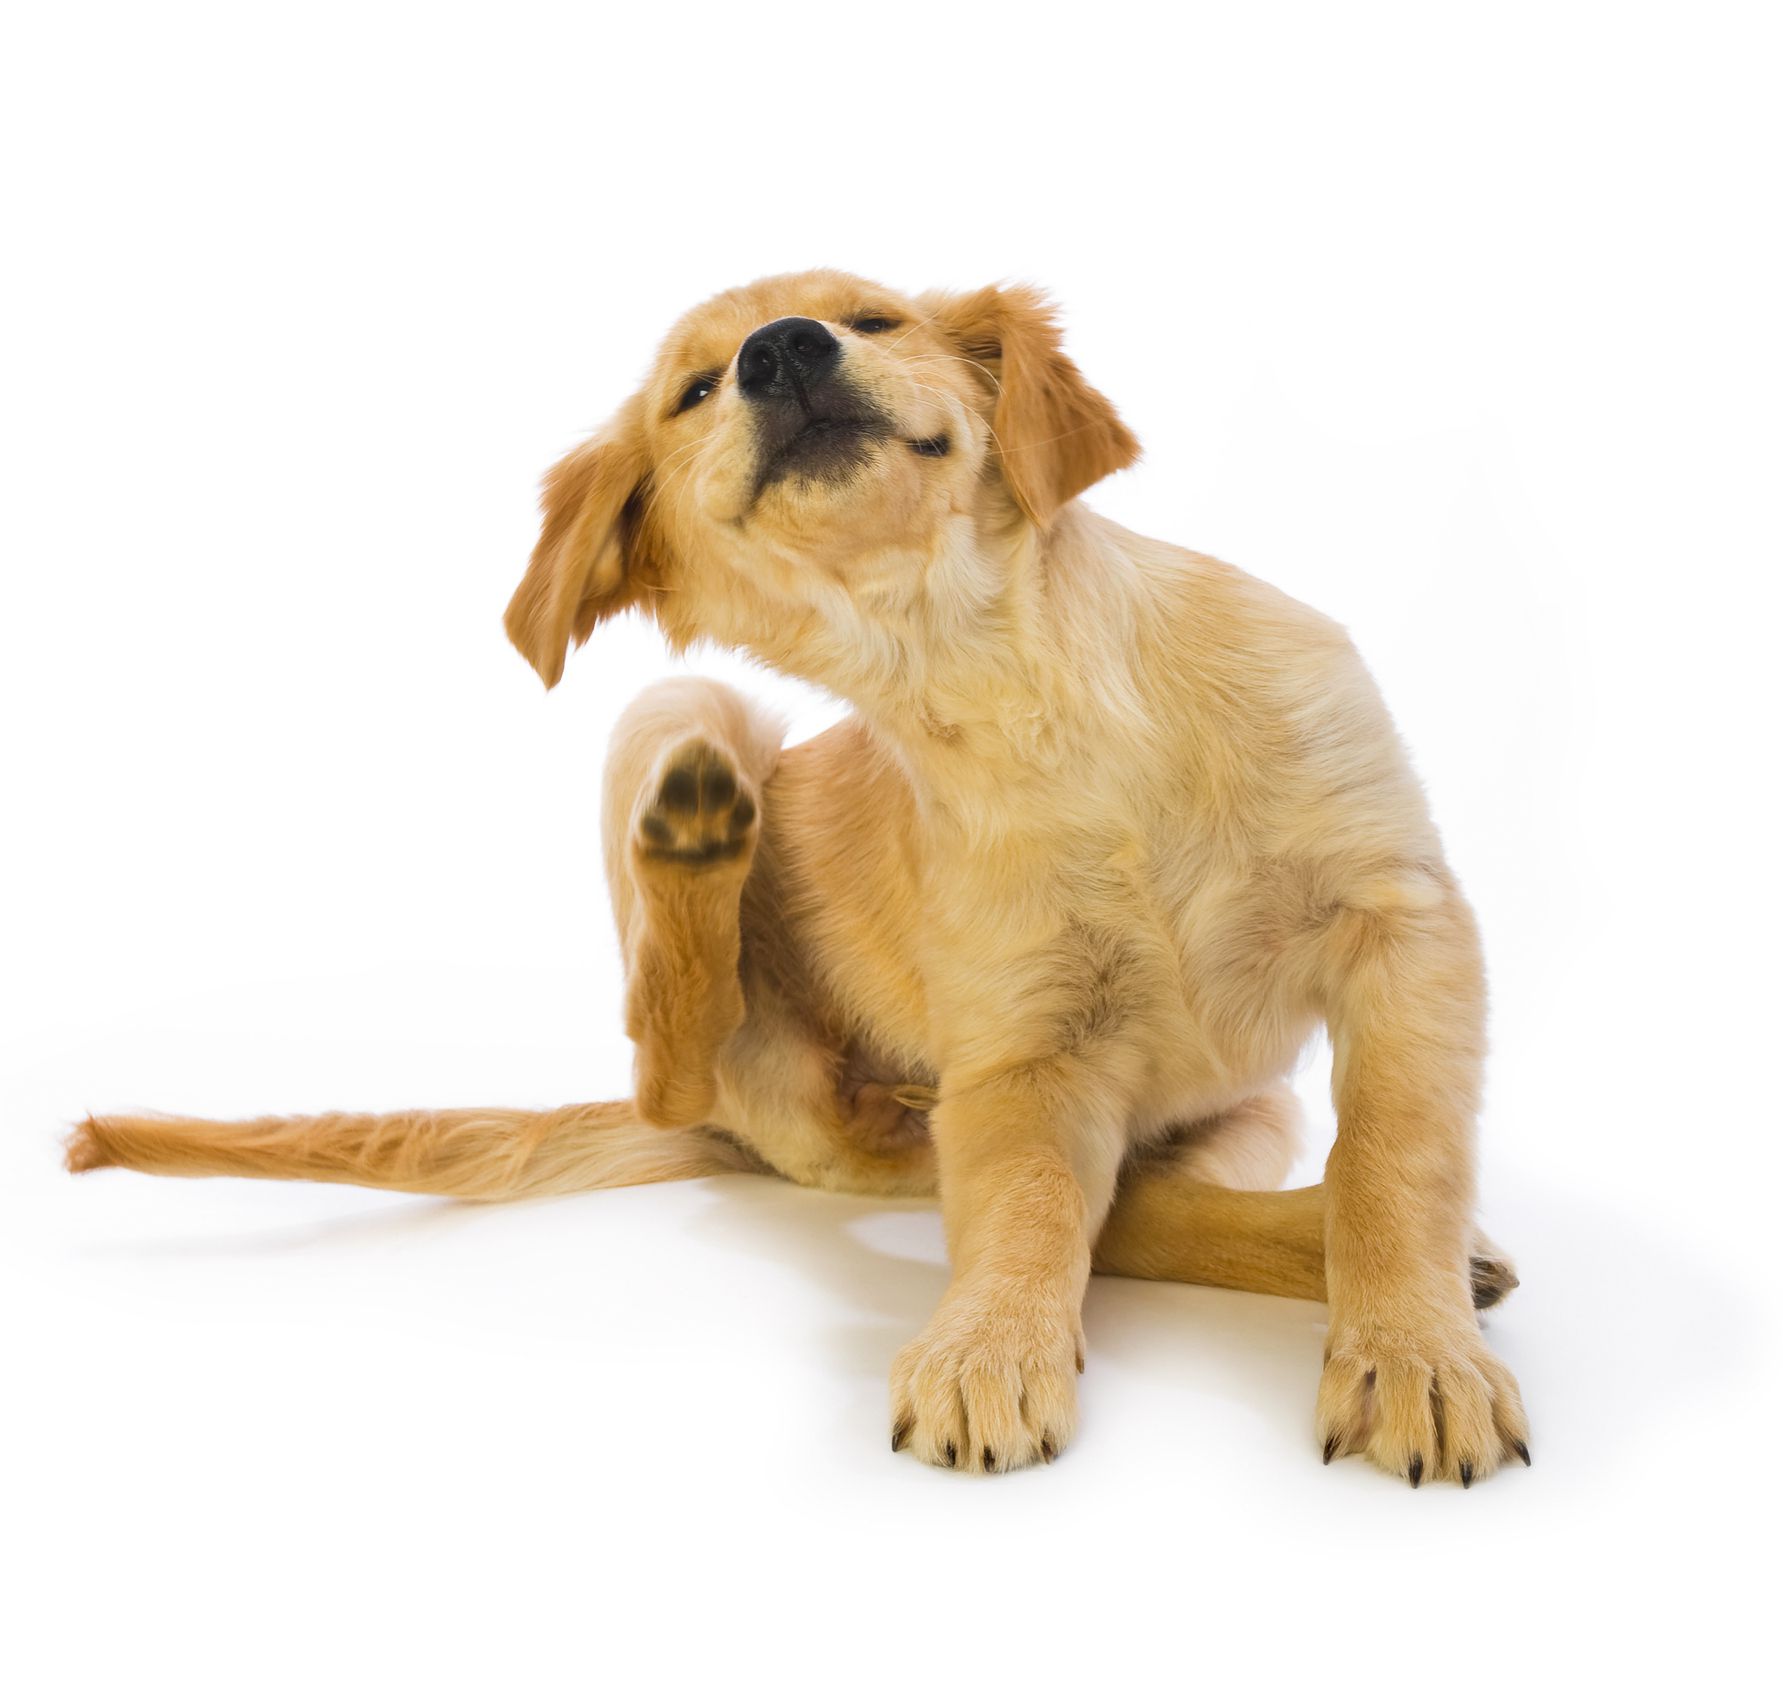 Fleas are not just itchy, they carry (and cause) disease.